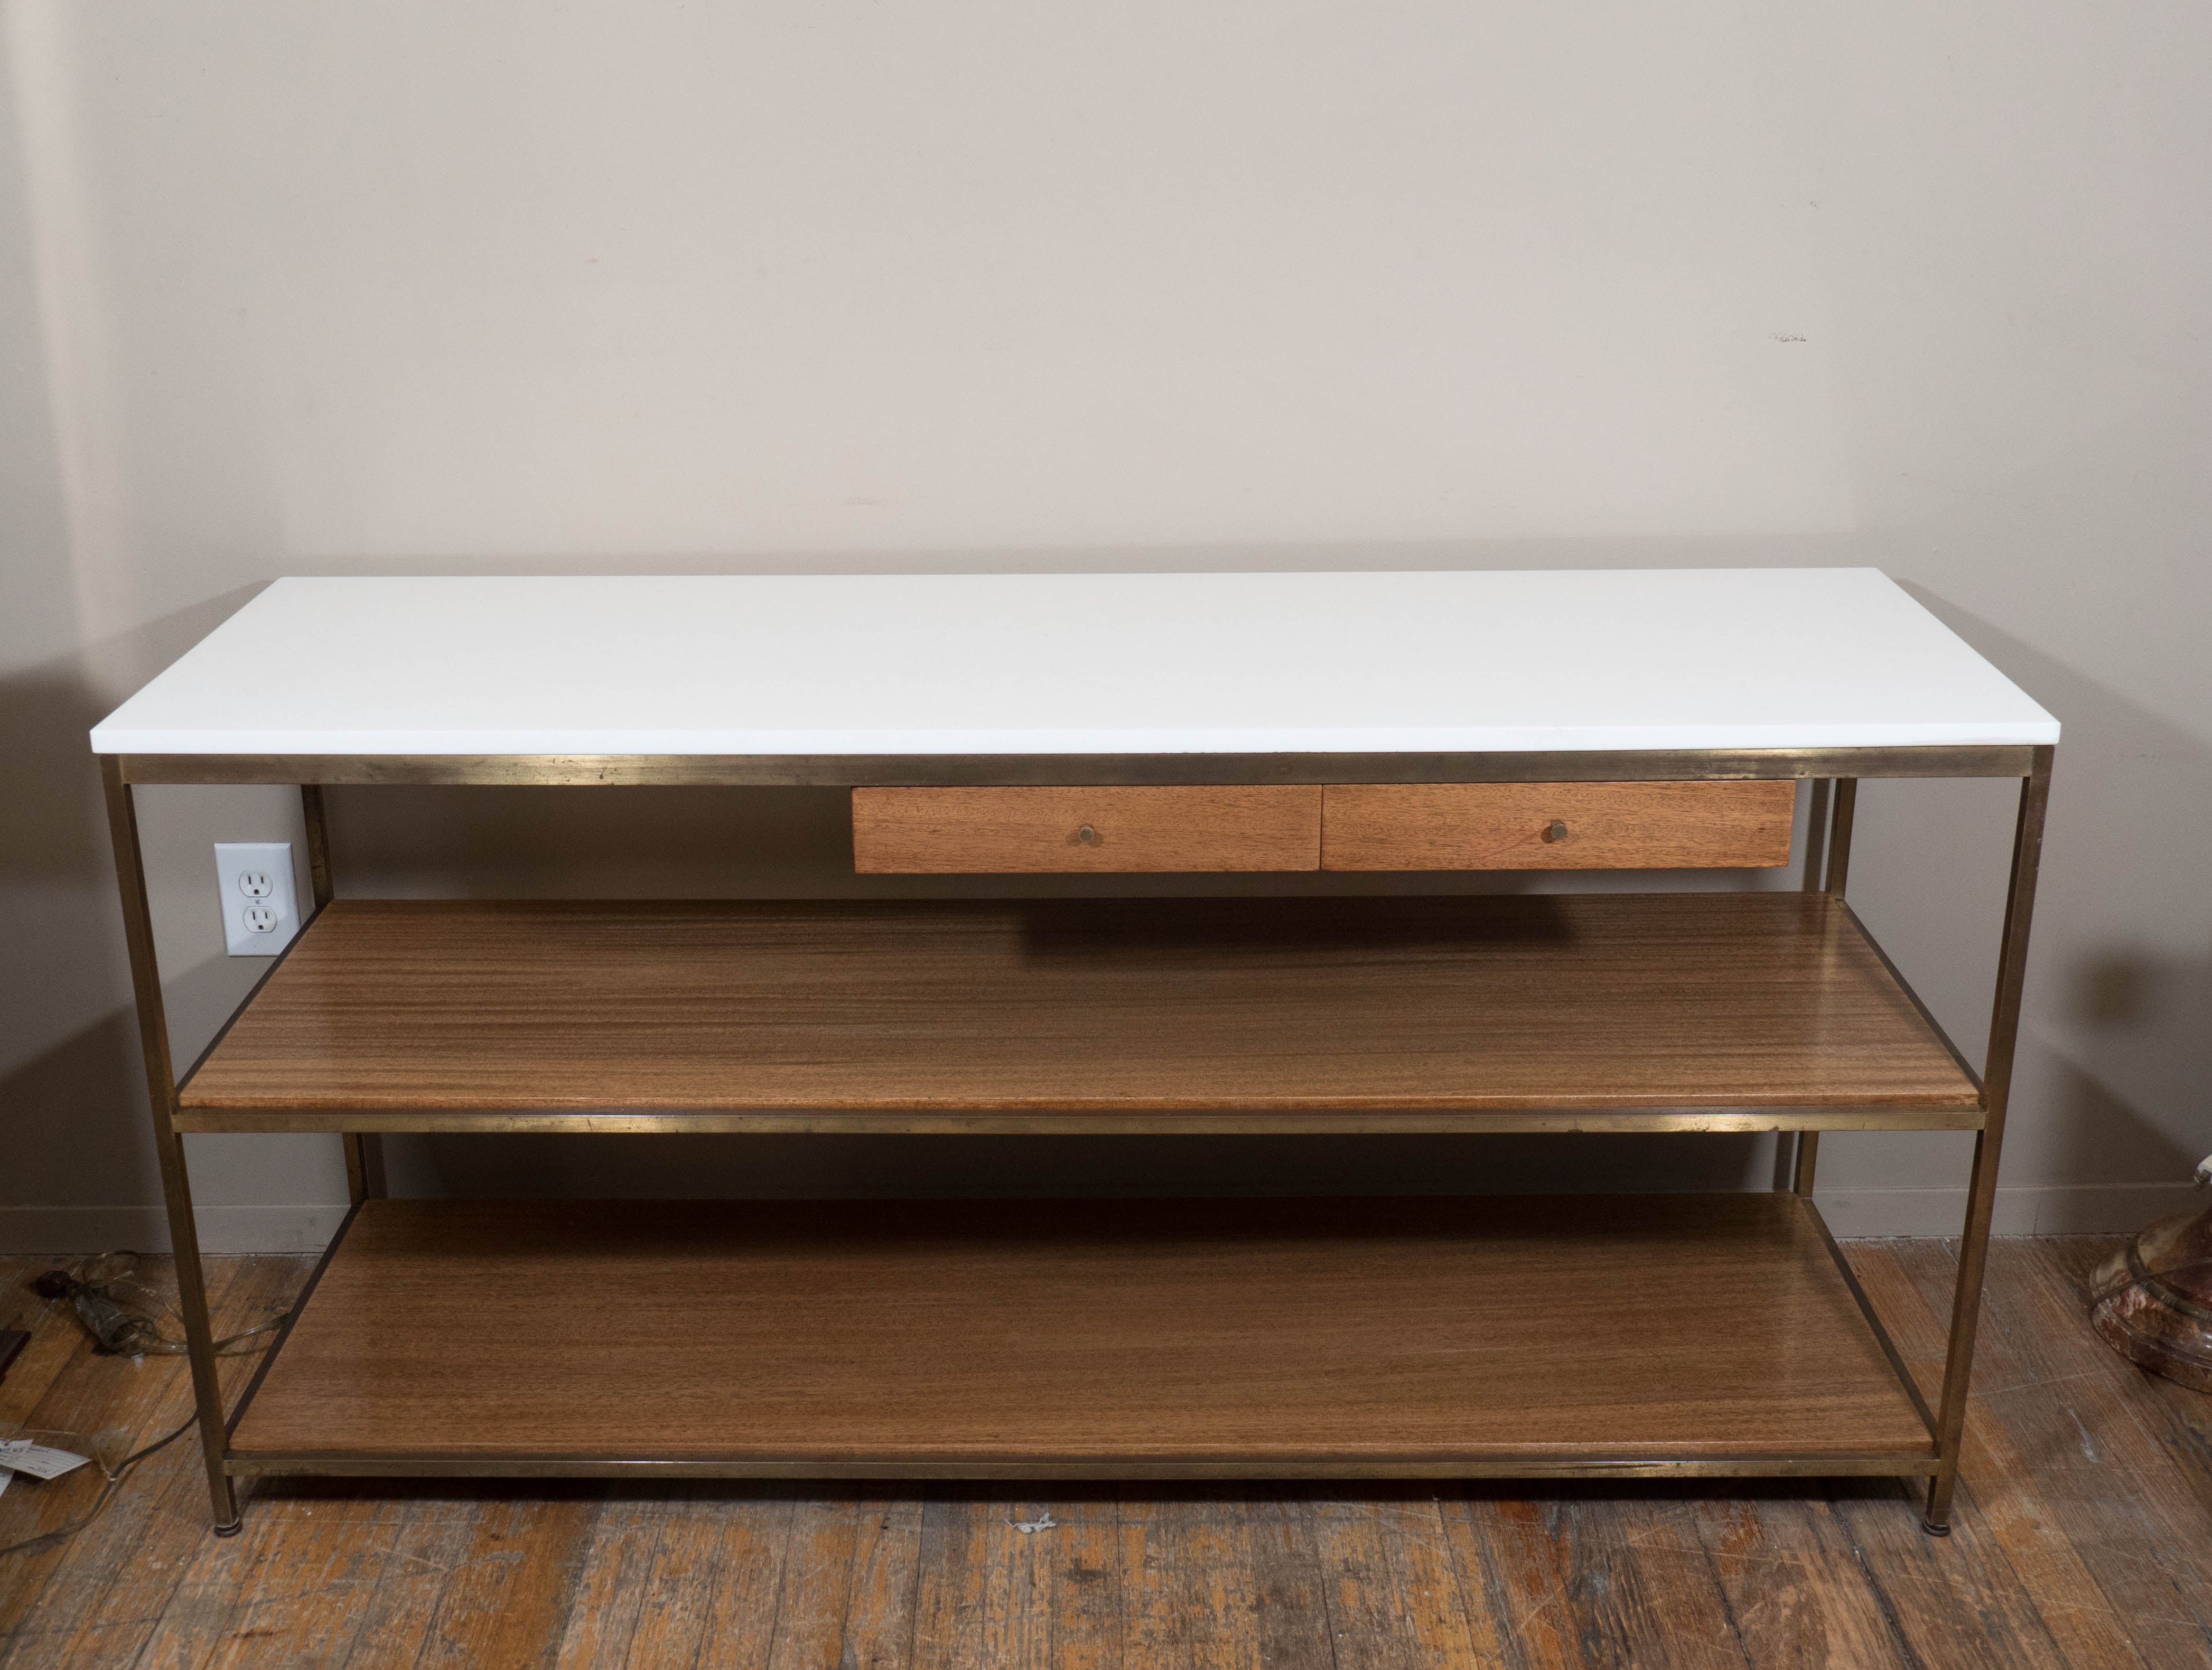 A vintage console, designed by Paul McCobb and produced circa 1950s by Calvin Furniture Co., with milk glass top on brass frame, with two exterior drawers, each with brass knob pulls, over two wood shelves. Markings include original label [Calvin,